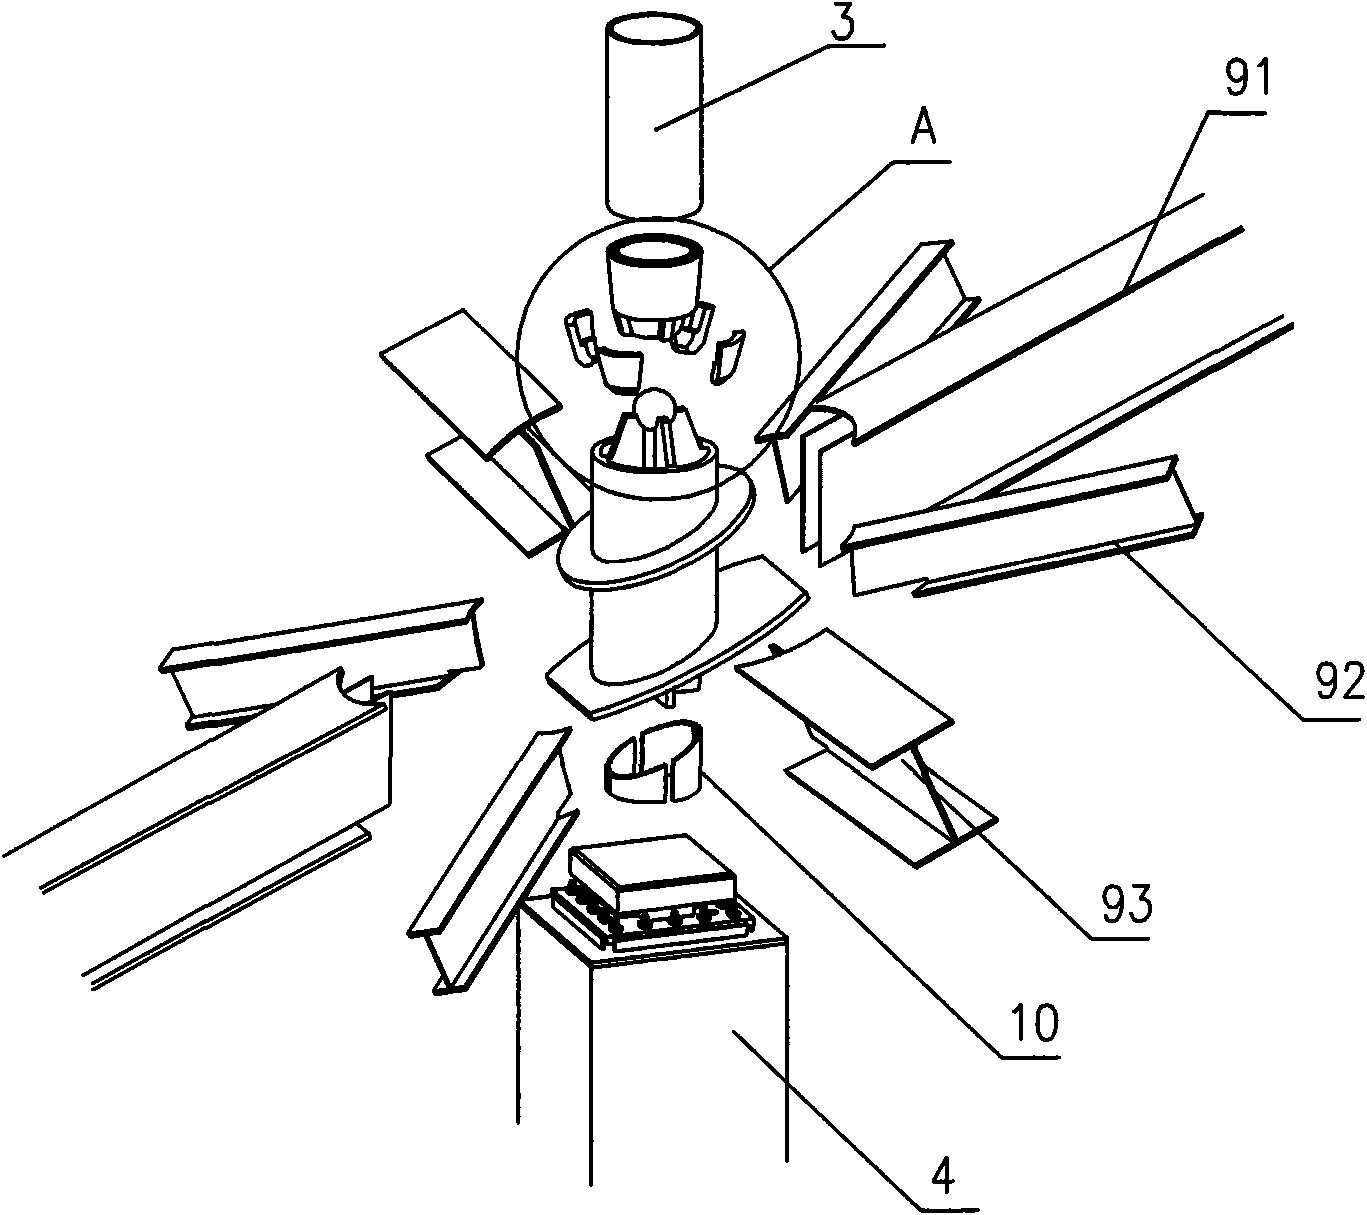 Universal spherical joint supporter with anti-loosening position-limiting structure